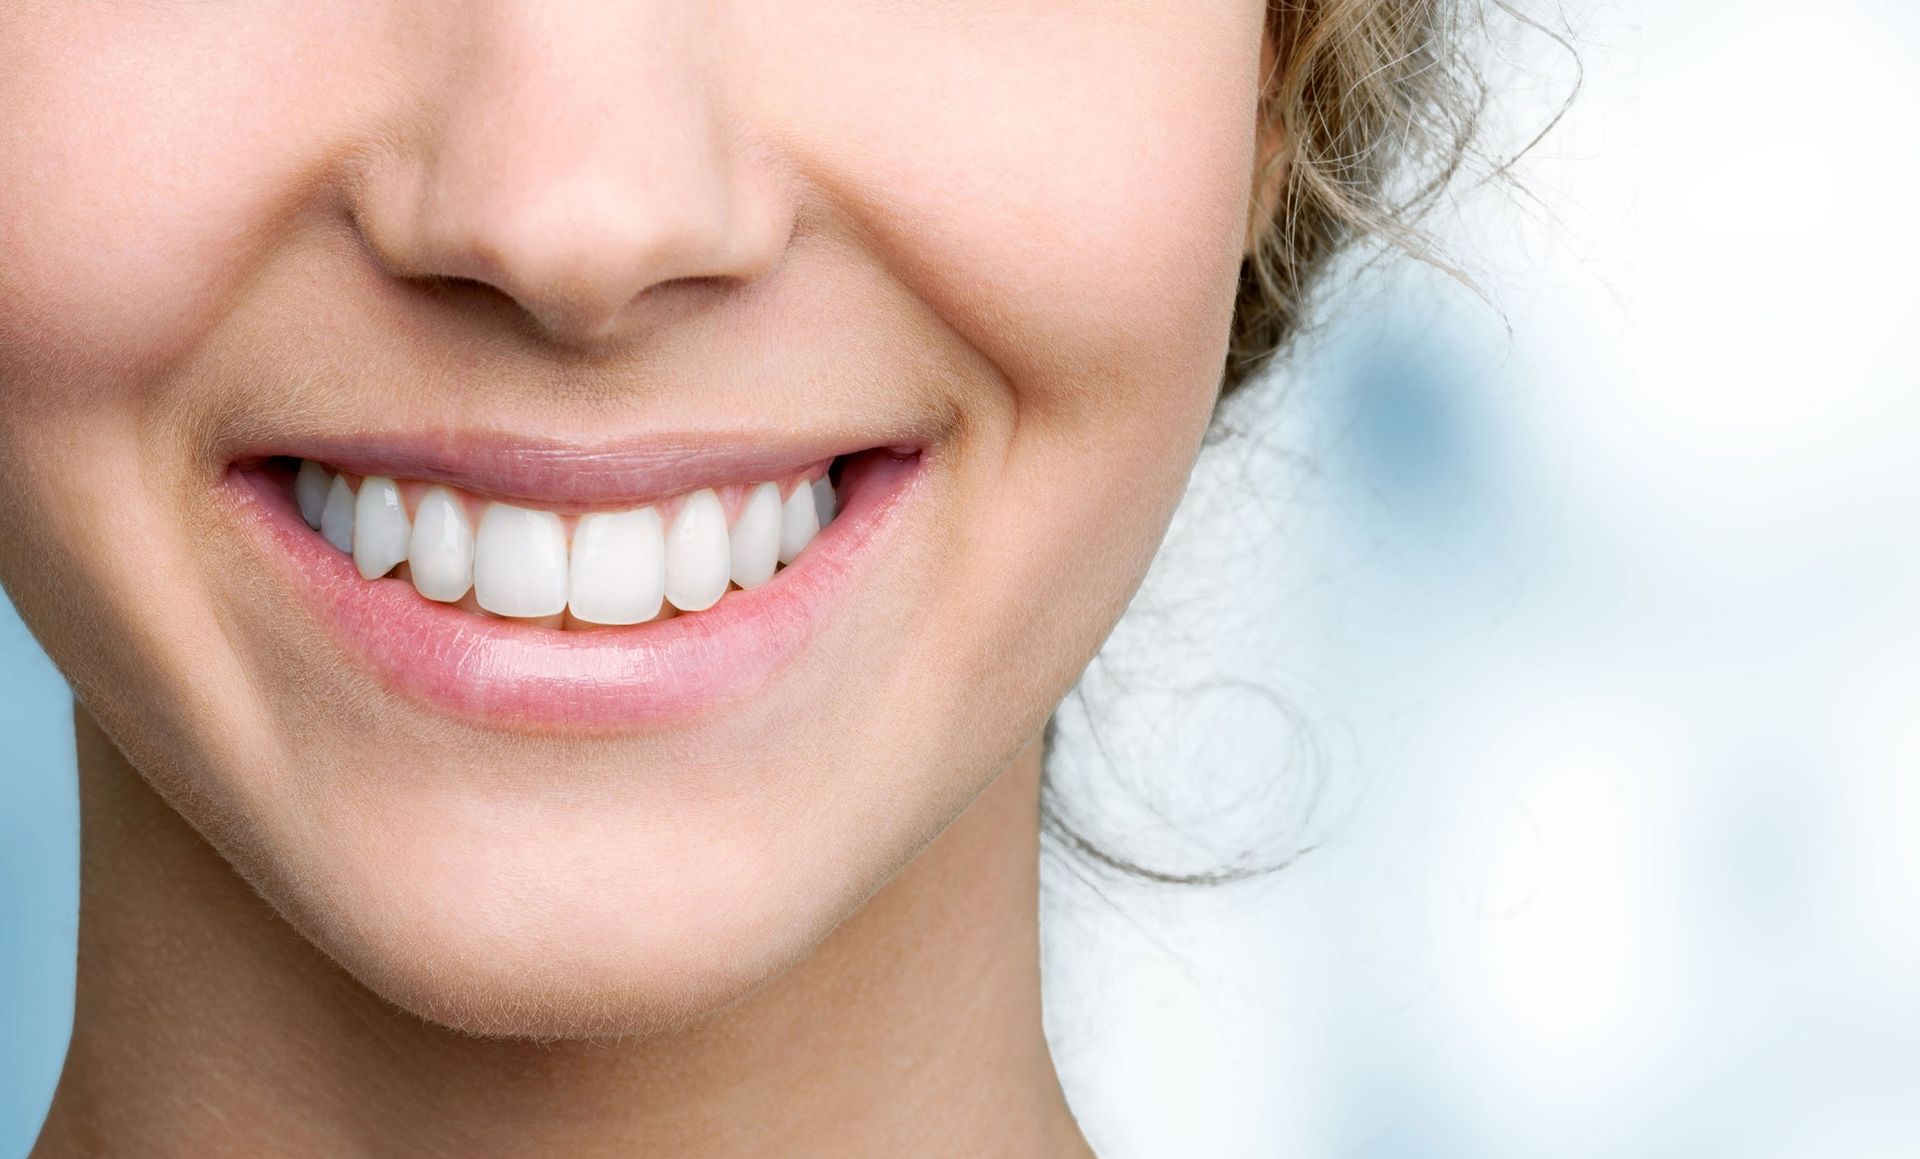 A close up of a woman 's smile with white teeth.